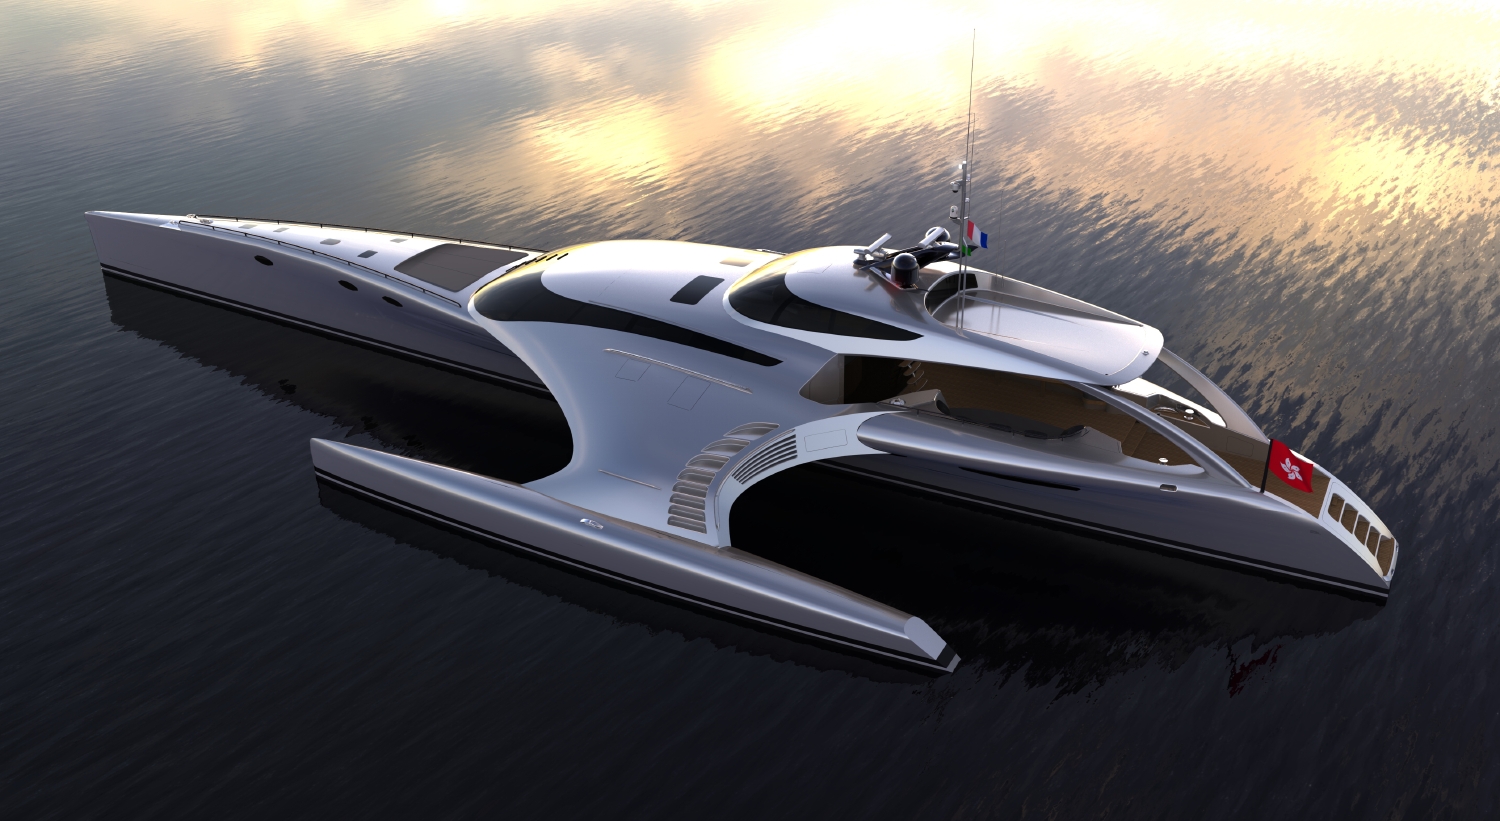 Passion For Luxury : Adastra - Super yacht